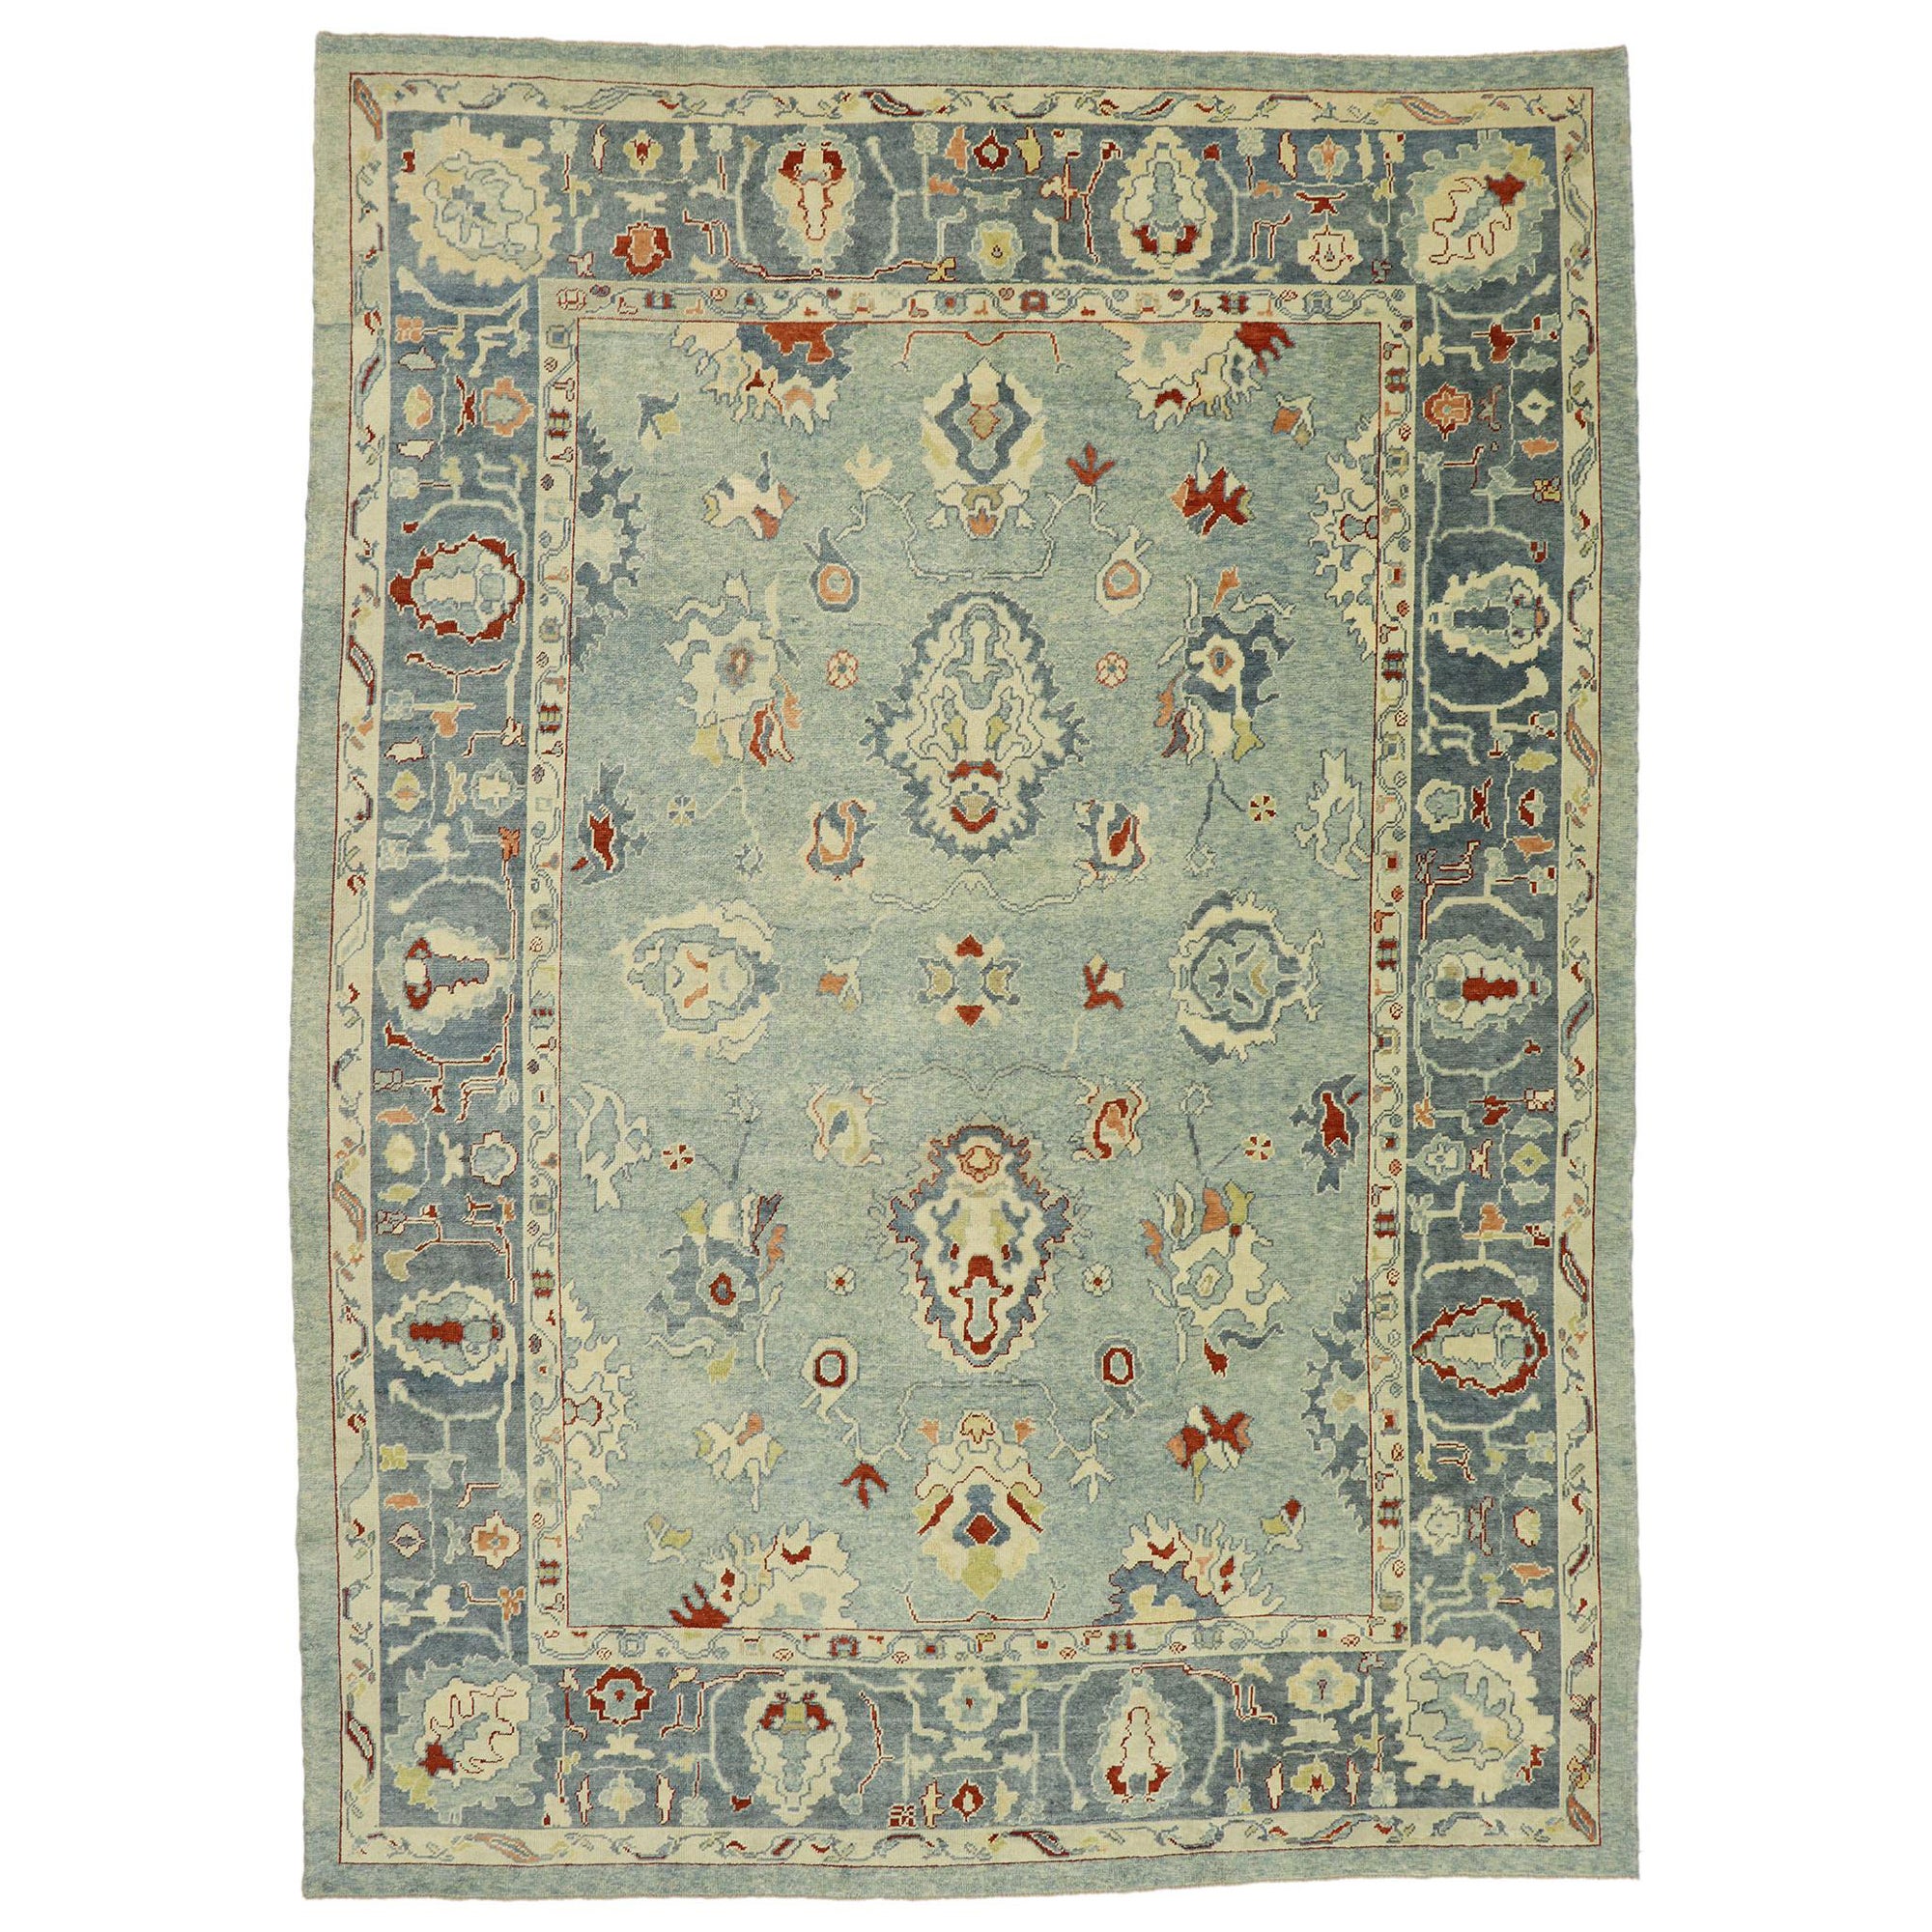 New Contemporary Turkish Oushak Rug with Federal Style, Cape Cod Nantucket Vibes